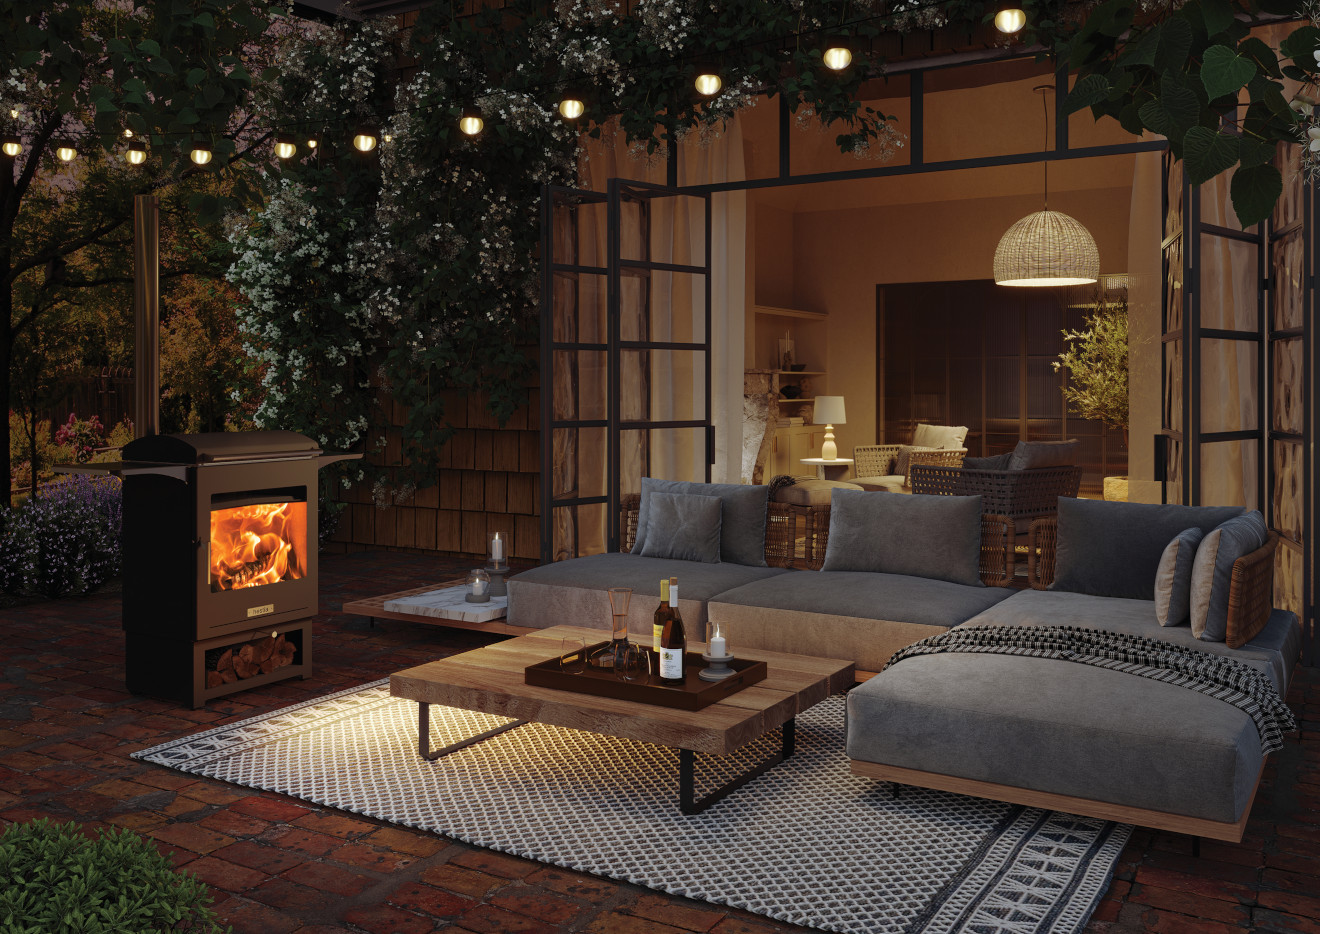 A luxury outdoor wood burner and stove in a scenic patio setting